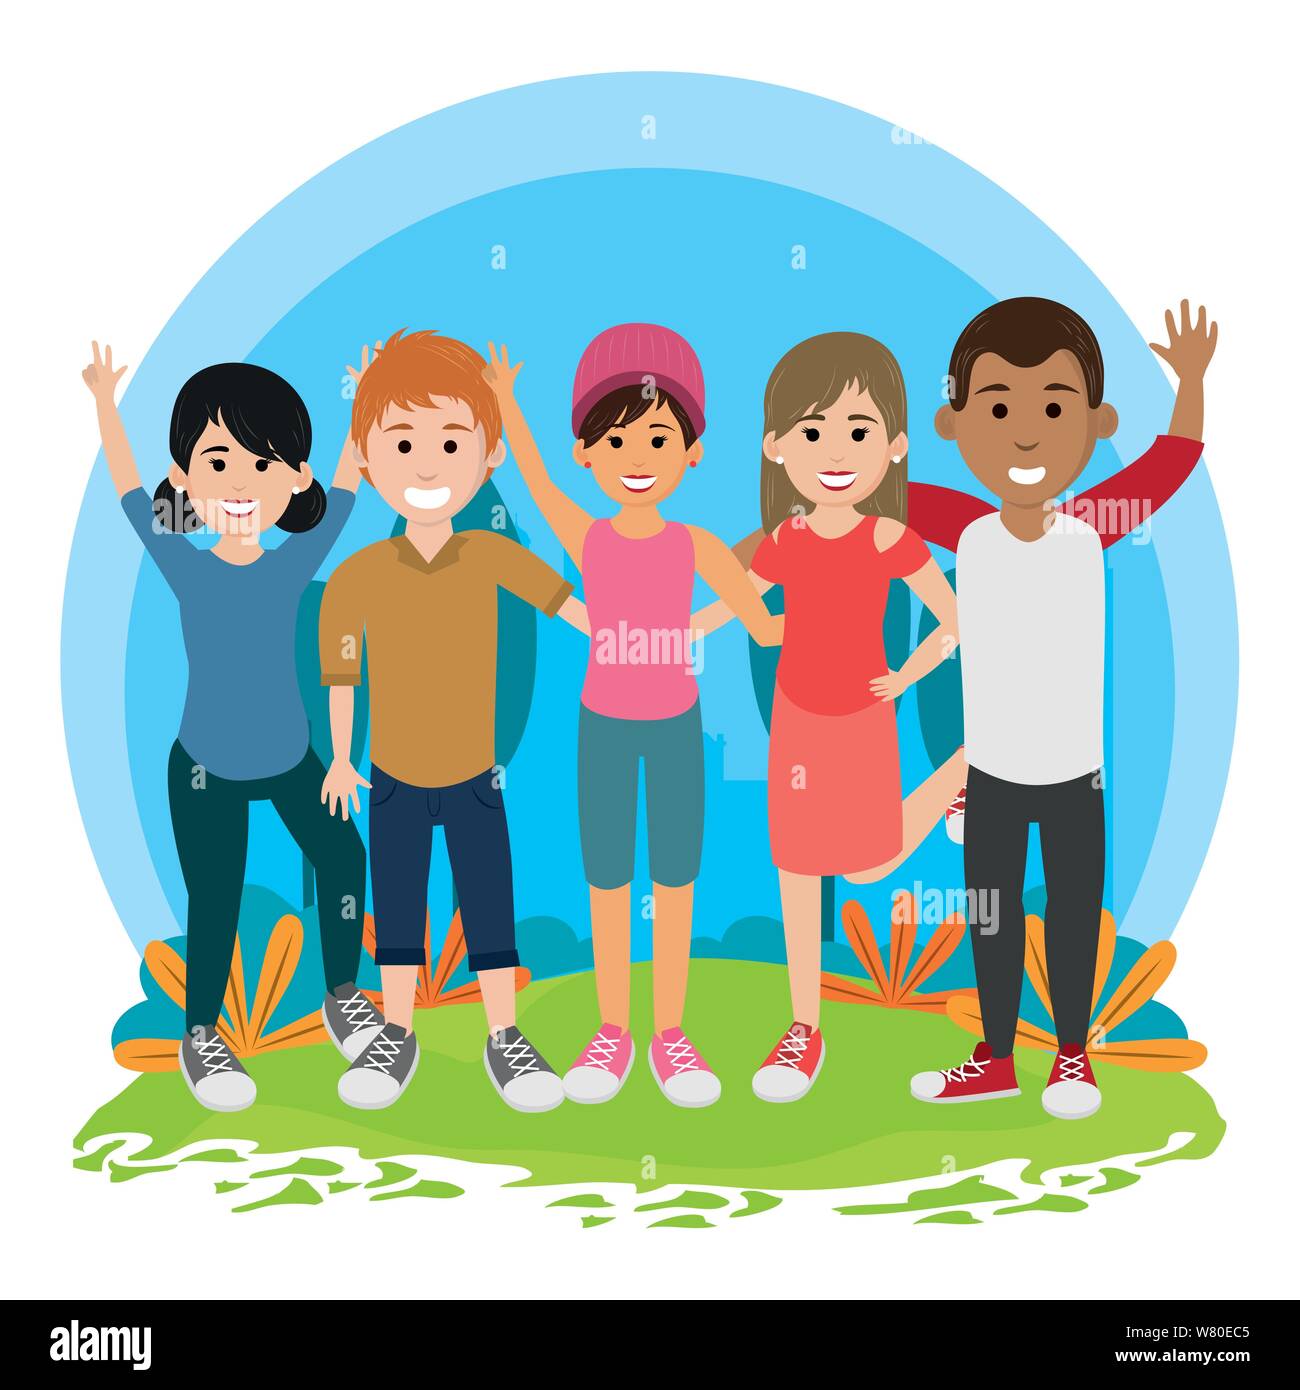 Friends Youth Happy People Cartoon Stock Vector Image Art Alamy Find & download free graphic resources for cartoon image. https www alamy com friends youth happy people cartoon image263084085 html